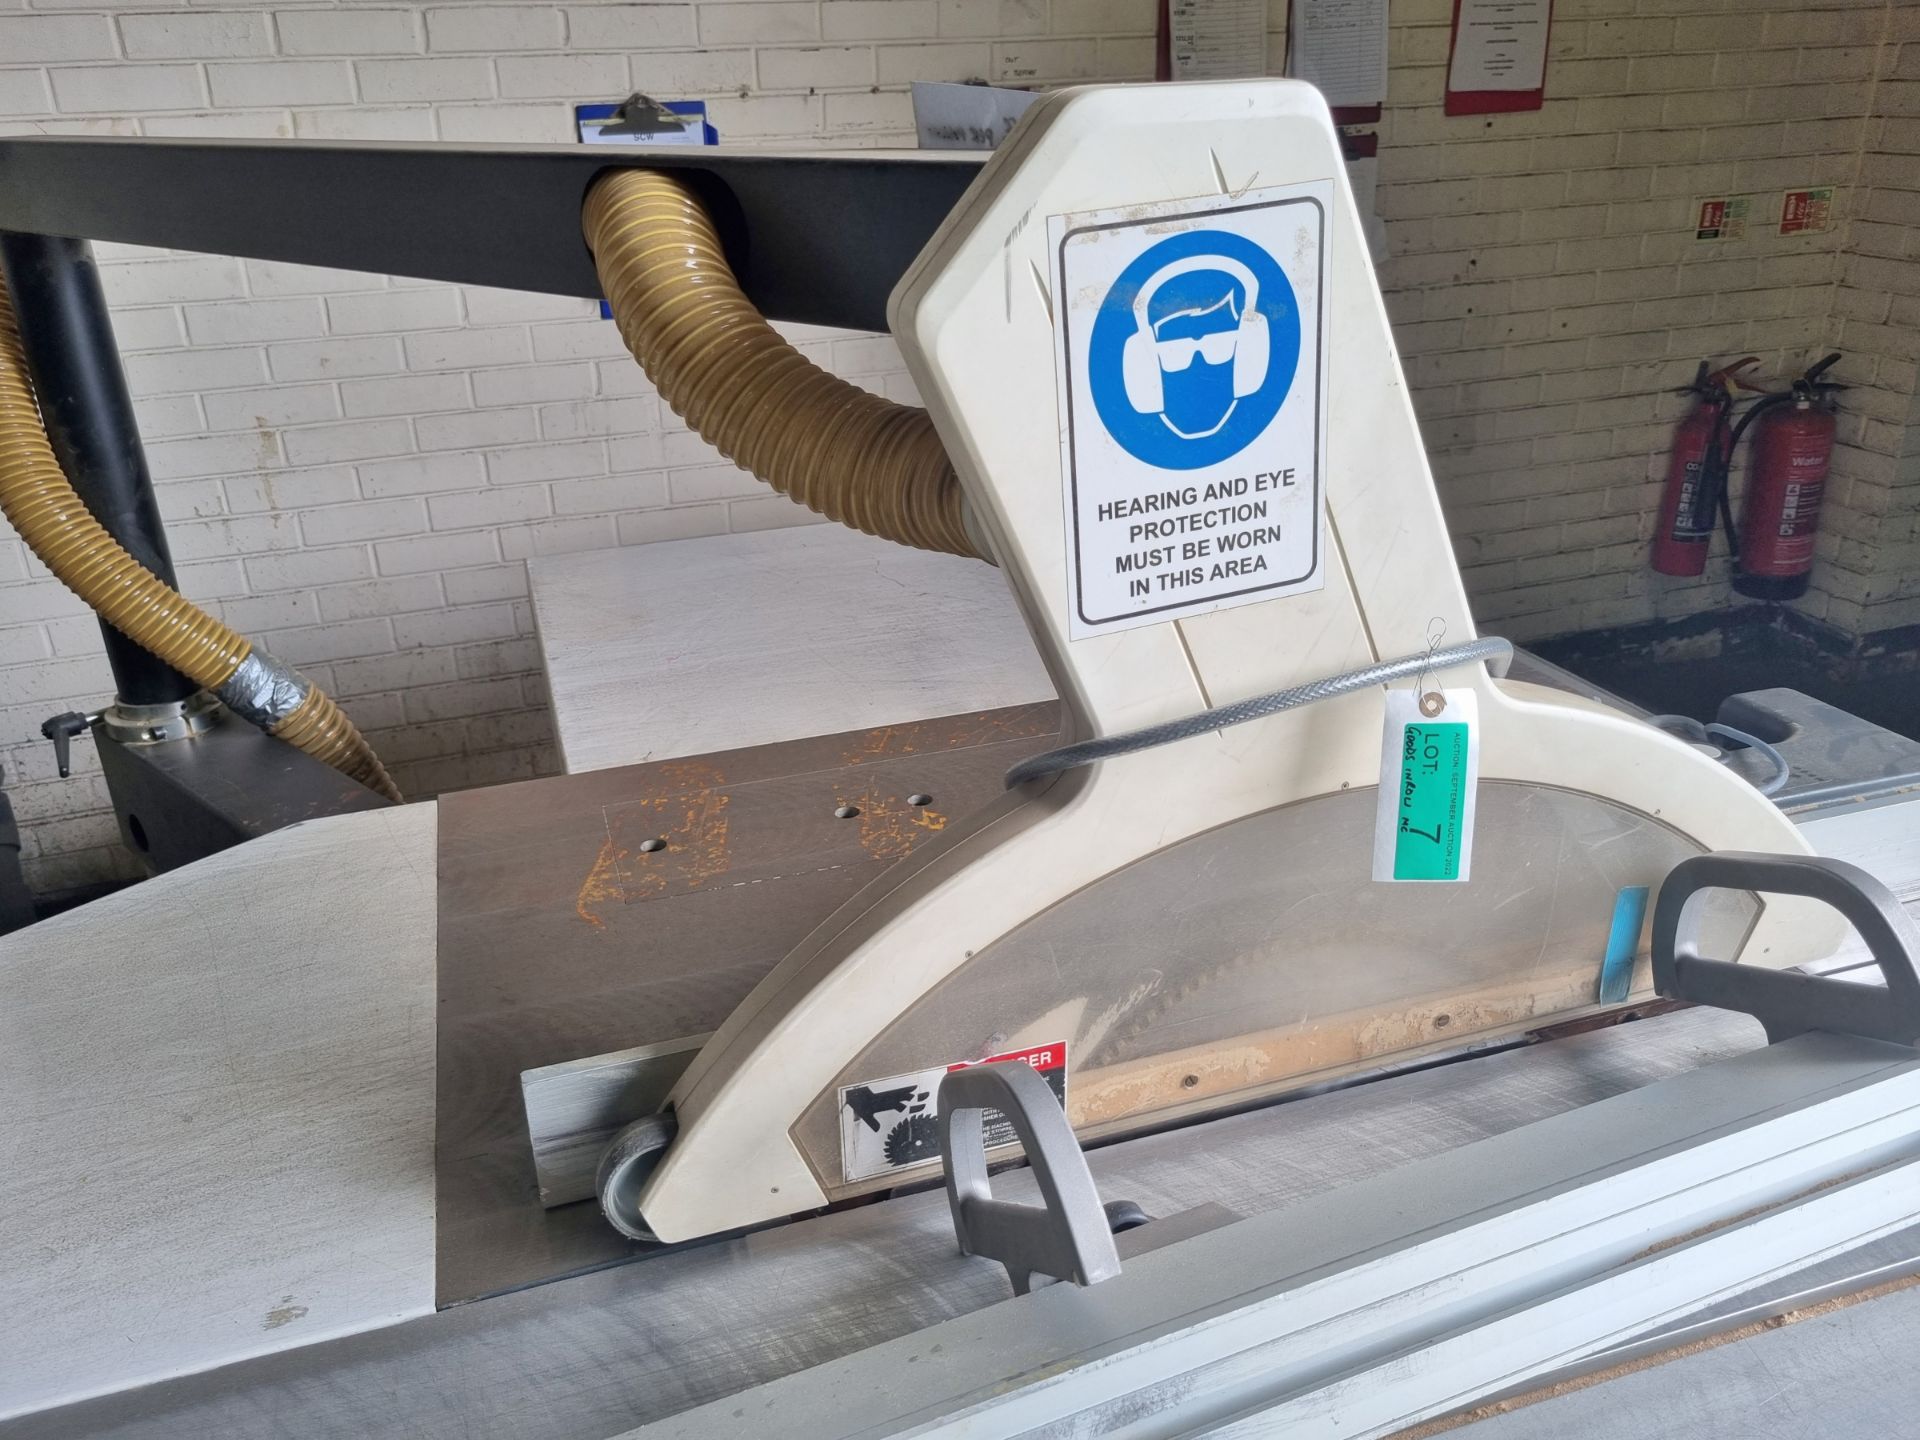 Paoloni P450Nx heavy duty panel saw with tilting table - YOM 09 - serial 23418 - 50hz - 415v 3 ph - Image 4 of 8